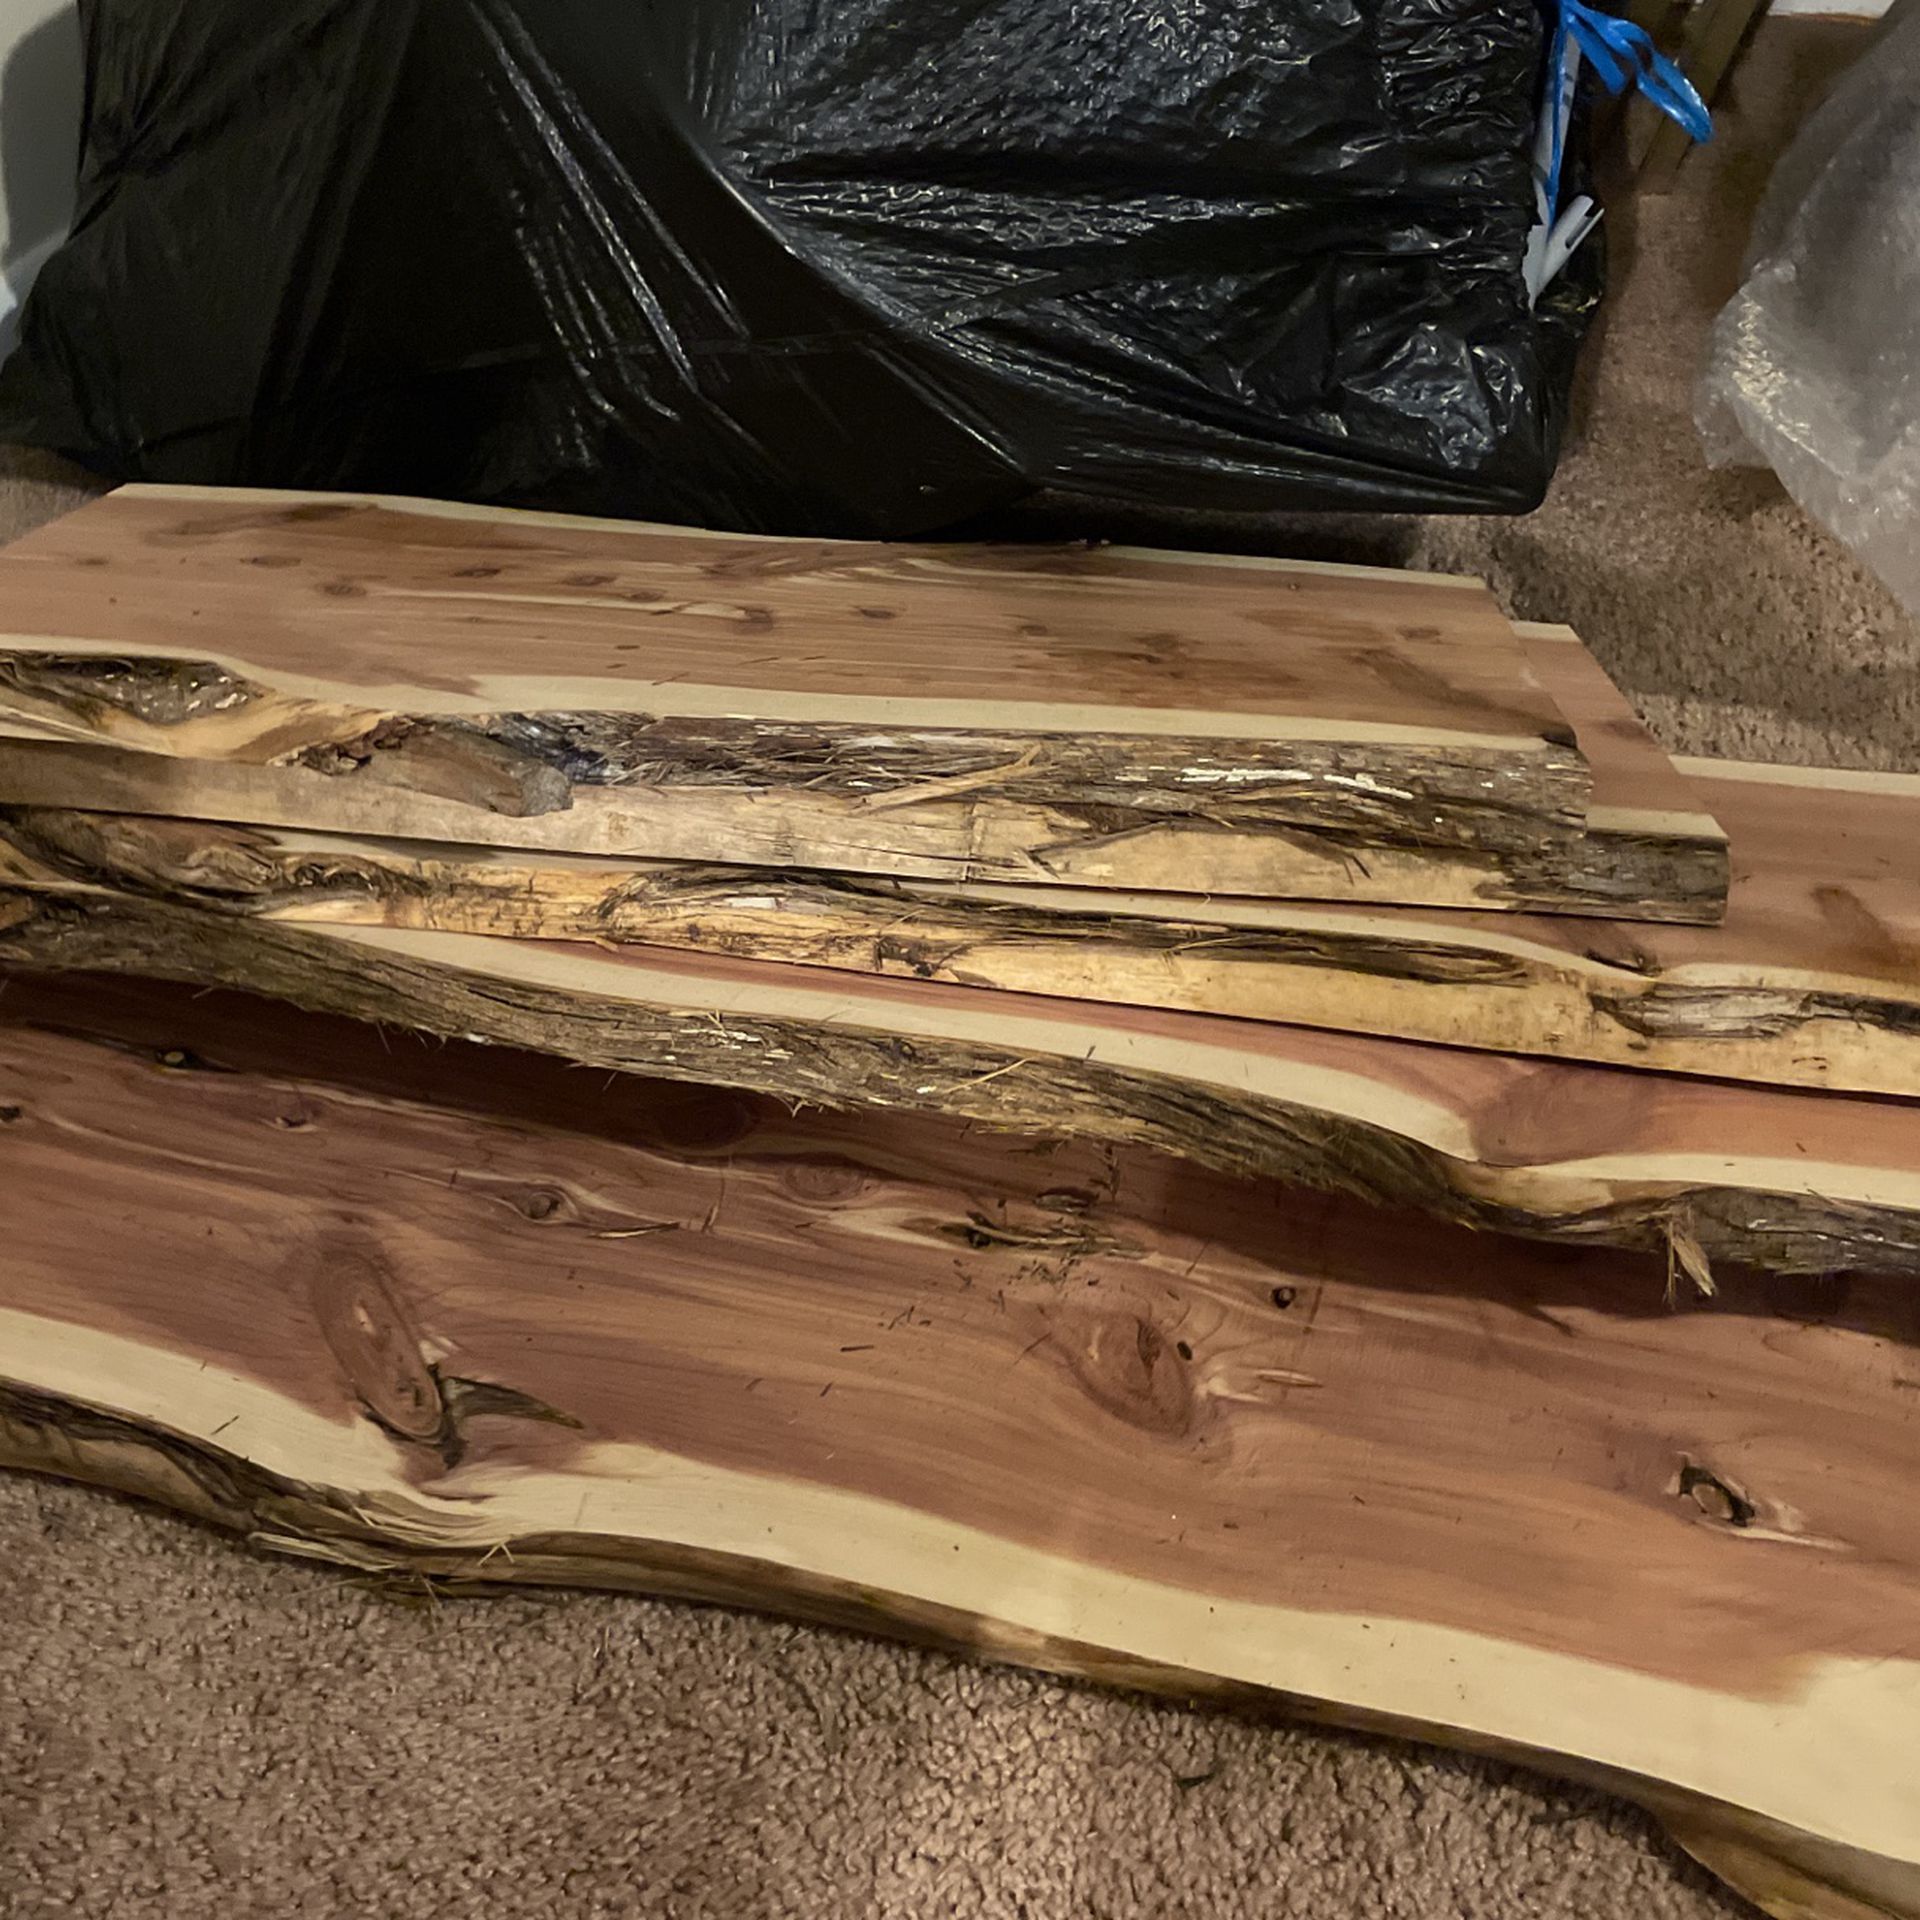 Raw Live Edge Wood For Shelf Or Table Top Or Whatever You Like , Very Pretty 5 Available Between 2-3Feet All For $ 120